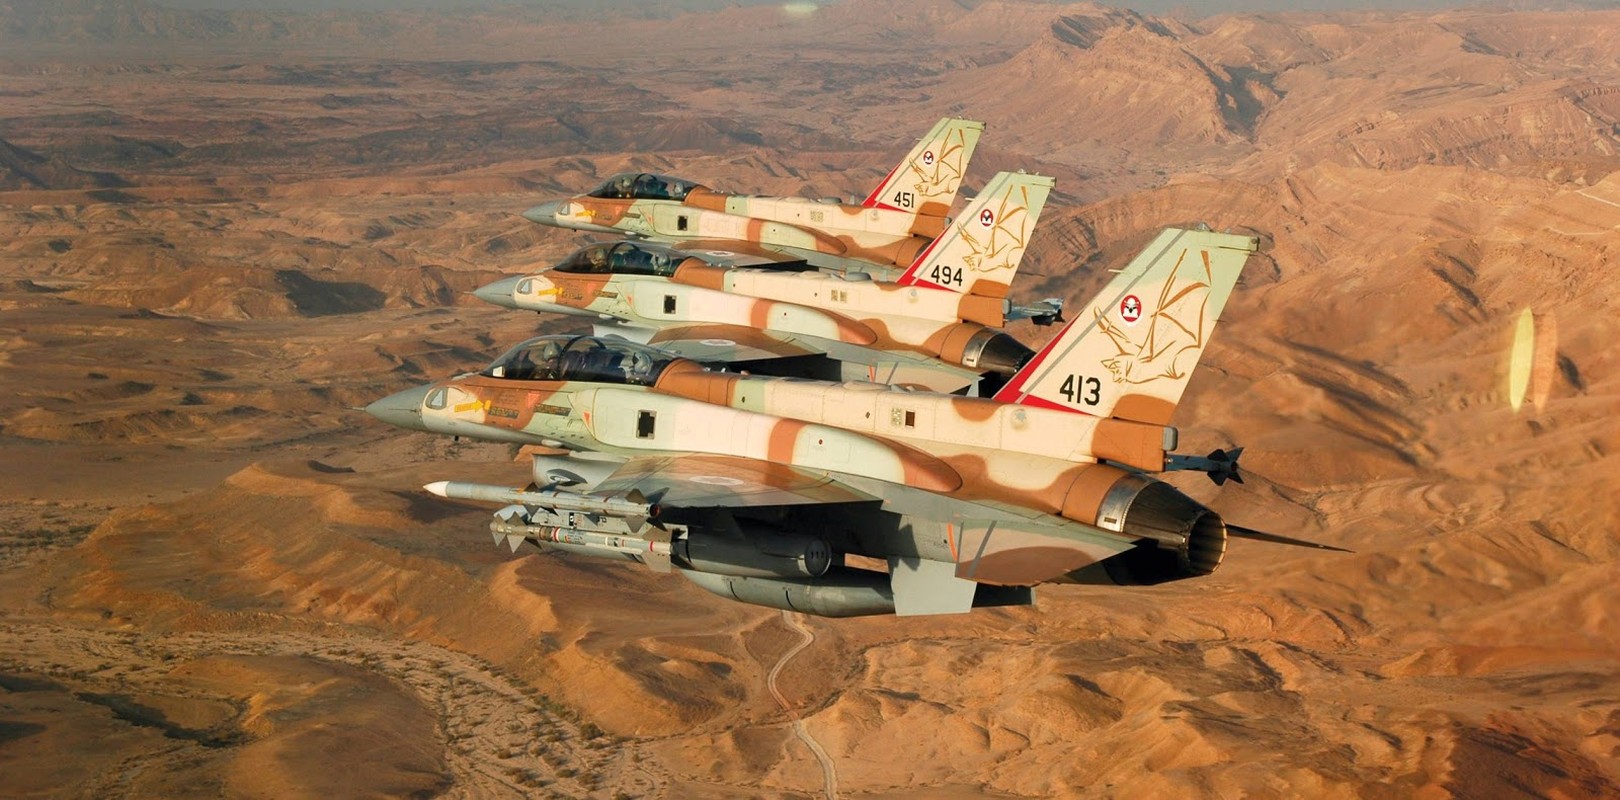 F-16 Israel gio chieu tro tim cach danh up S-300 cua Syria-Hinh-3